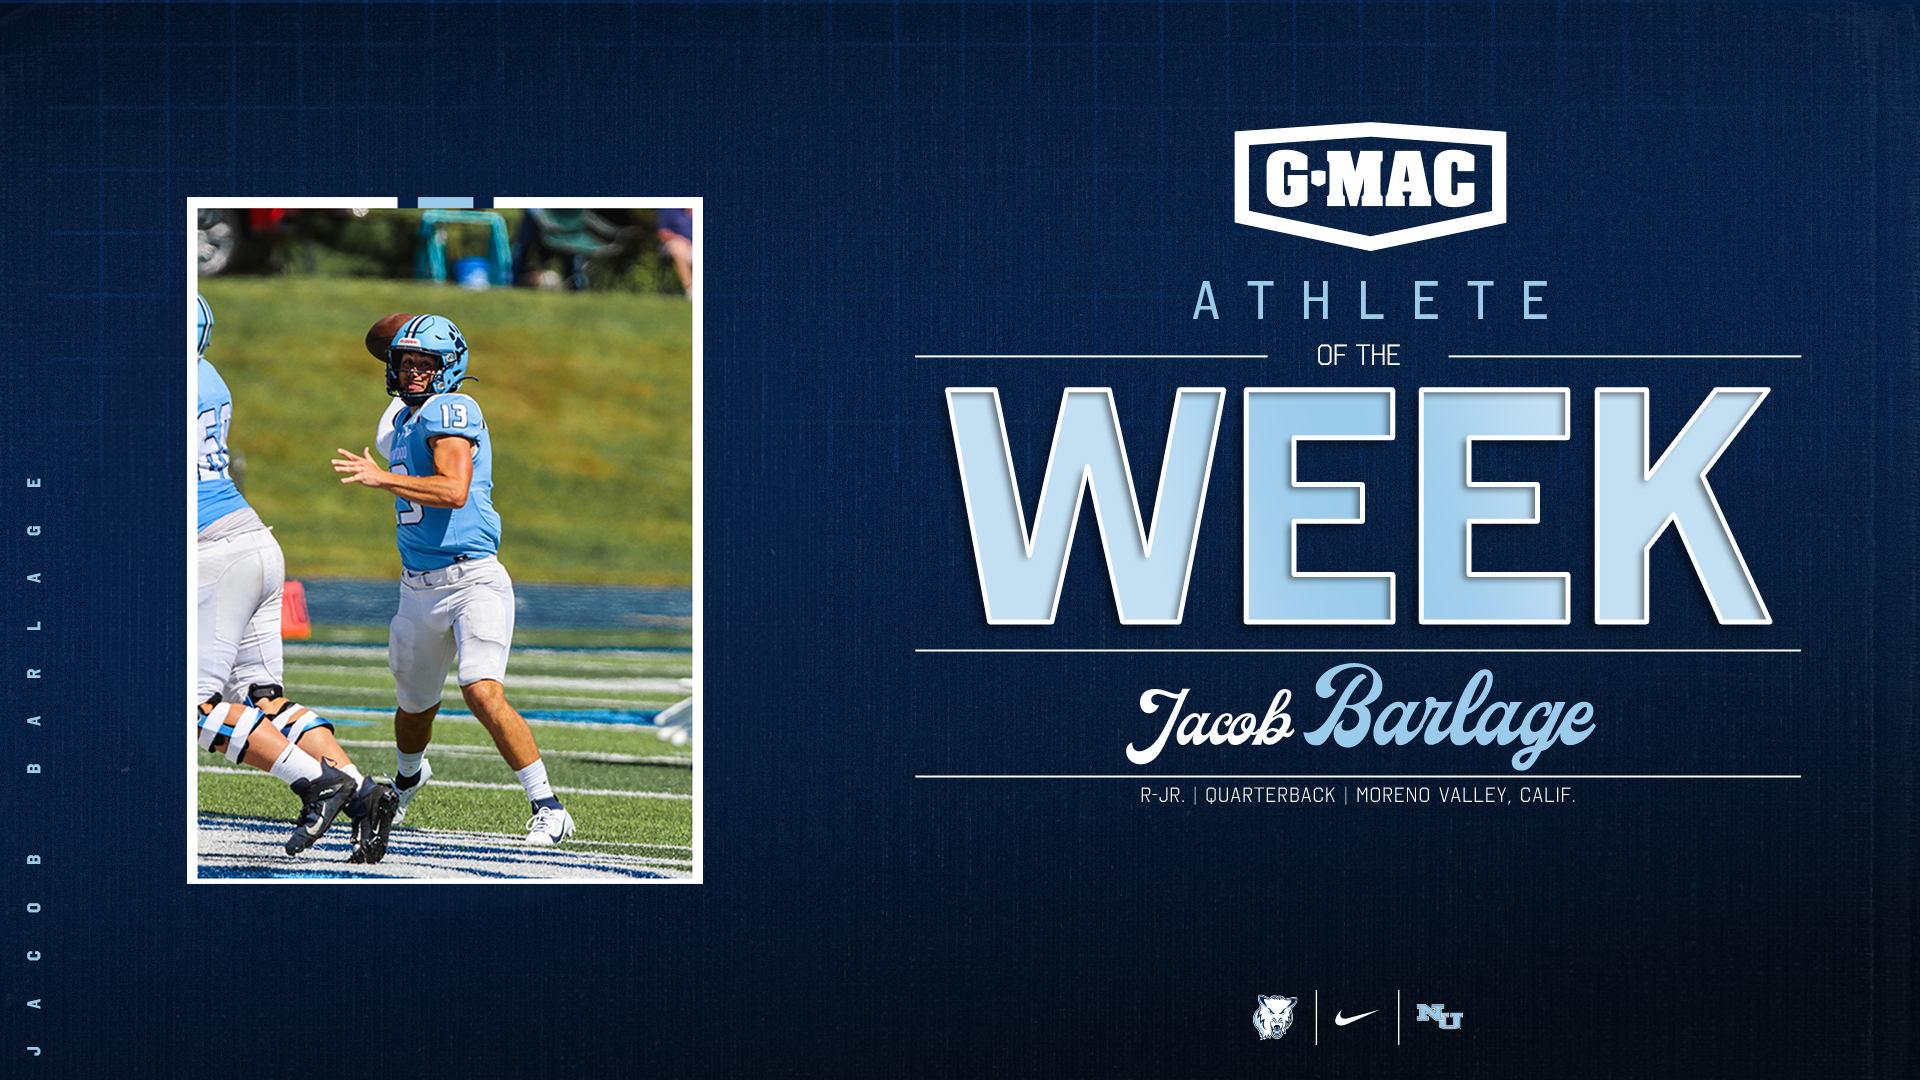 Jacob Barlage Named G-MAC Offensive Athlete of the Week